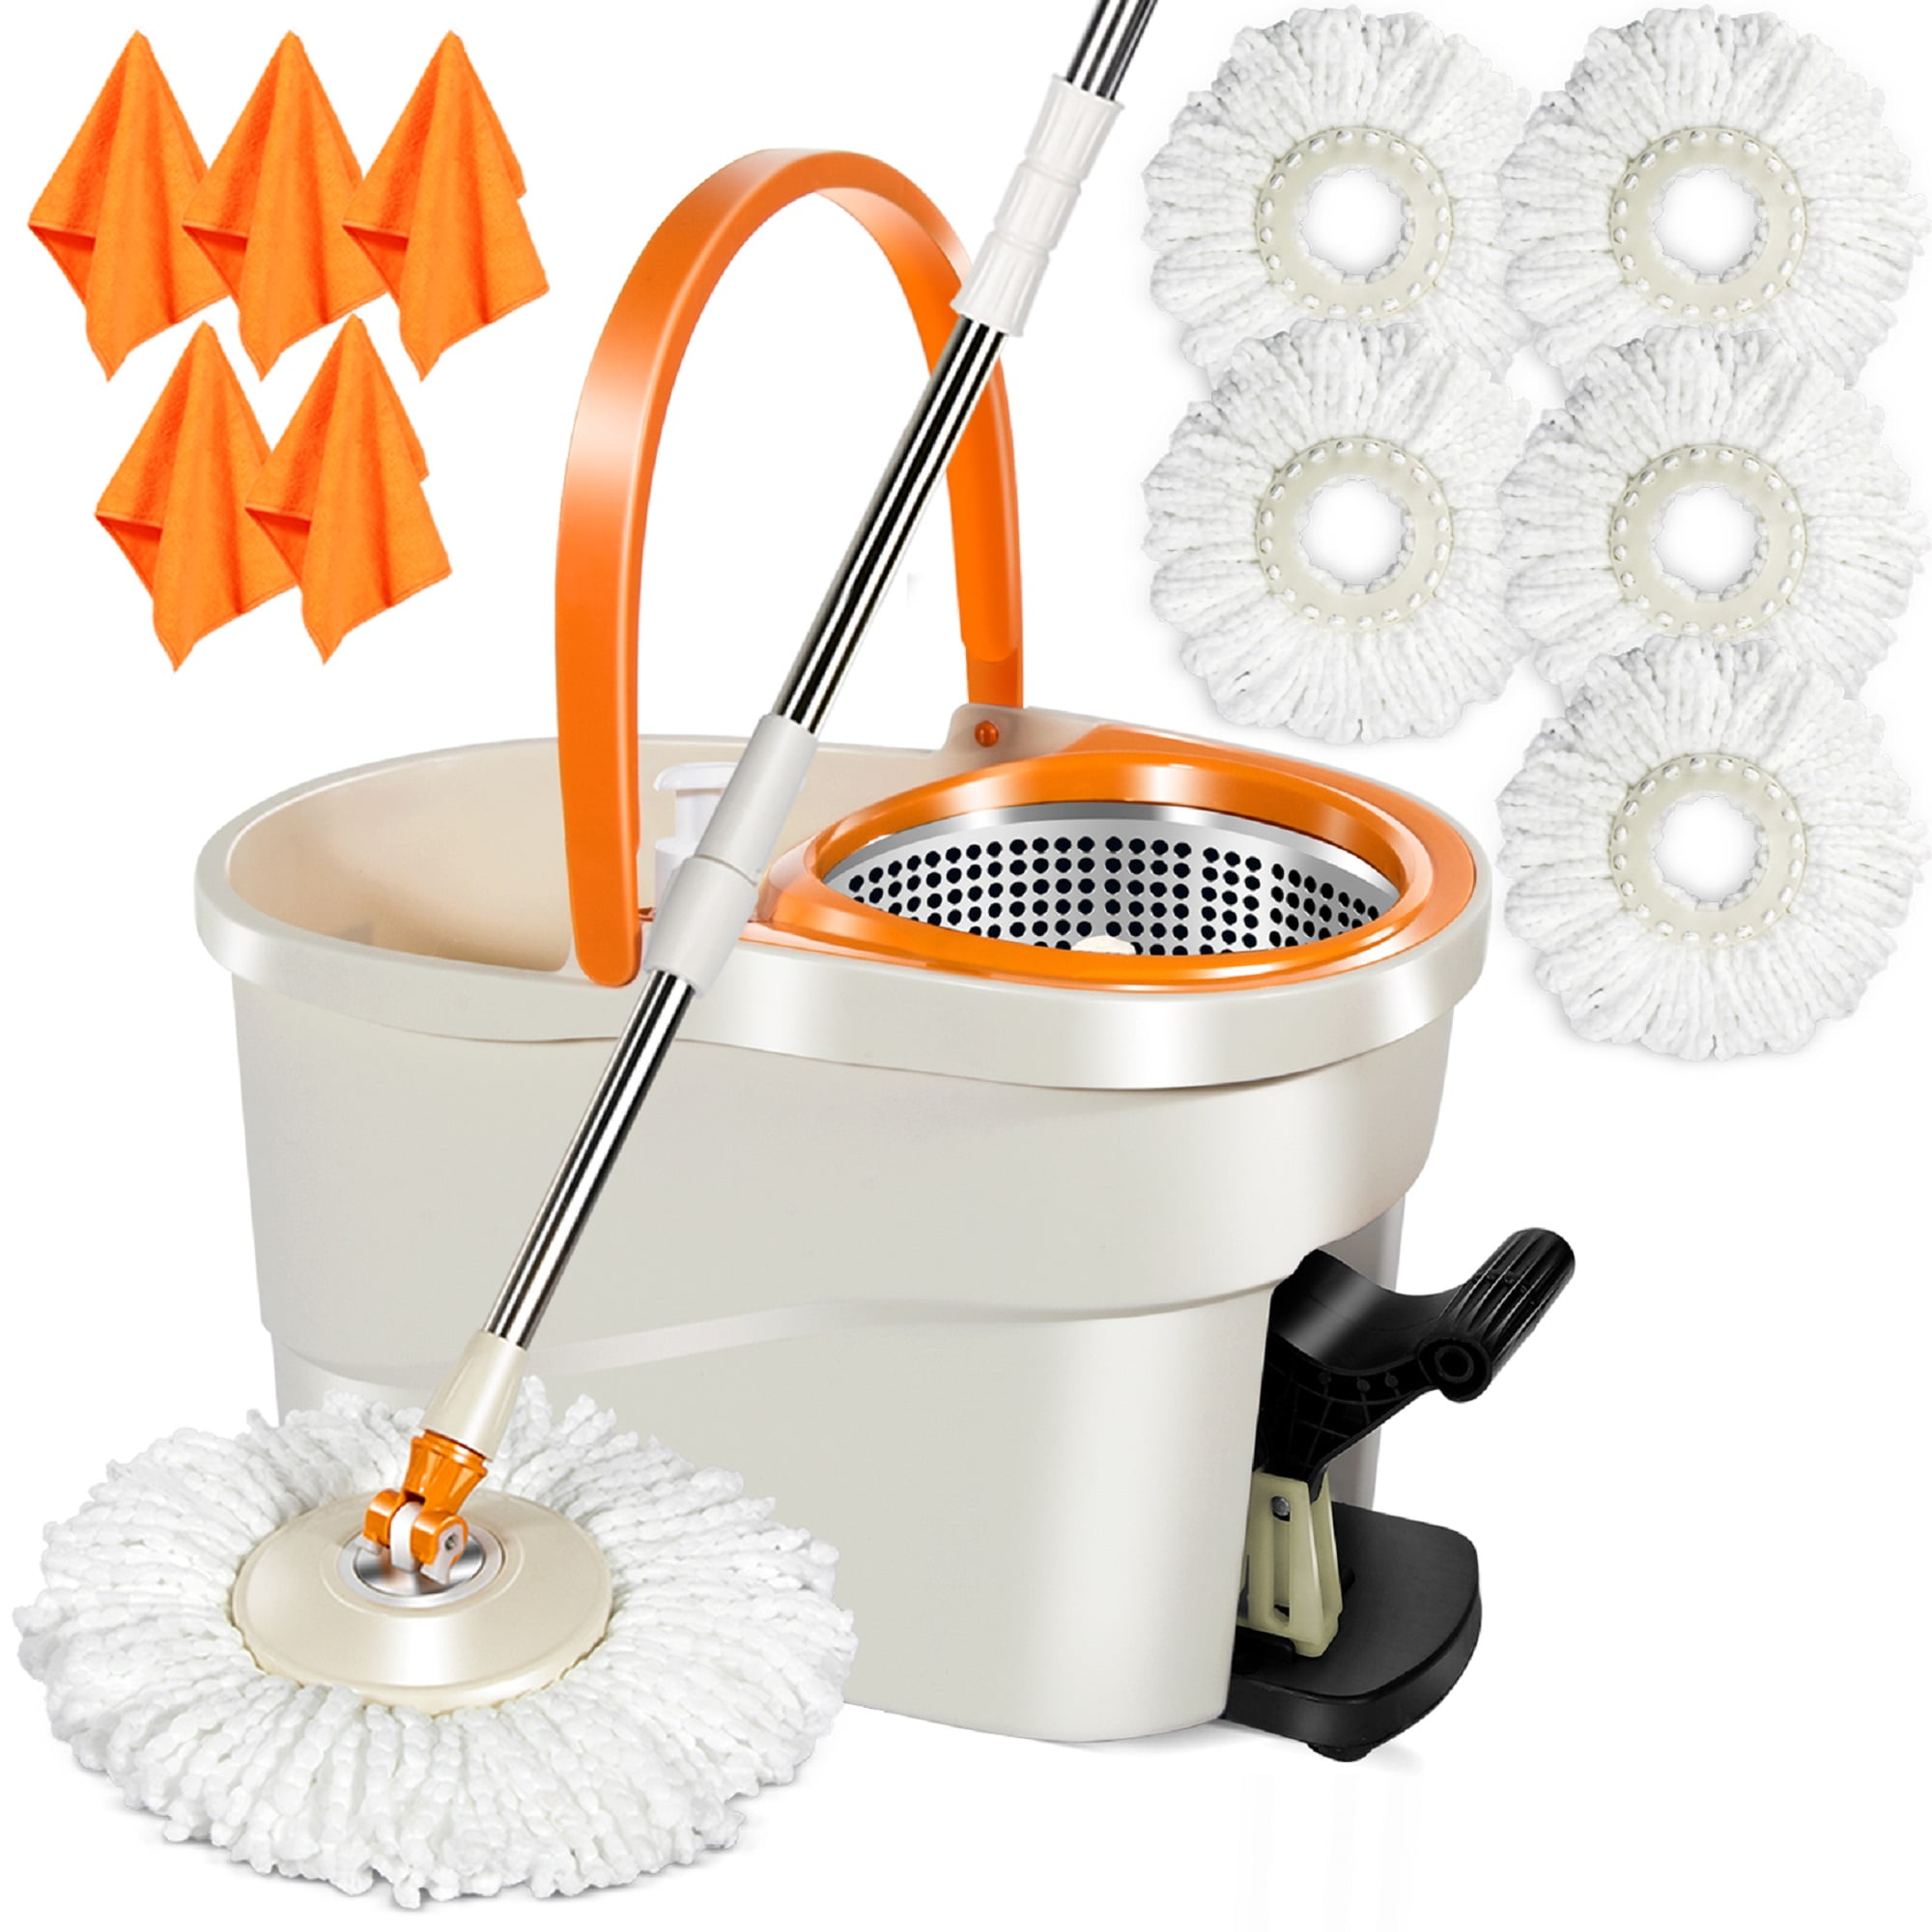 MASTERTOP Spin Mop Bucket System with Wringer Set, Mop Buckets Separate  Clean and Dirty Water,360° 6psc Microfiber Spin Mops, 51.2 Inch Stainless